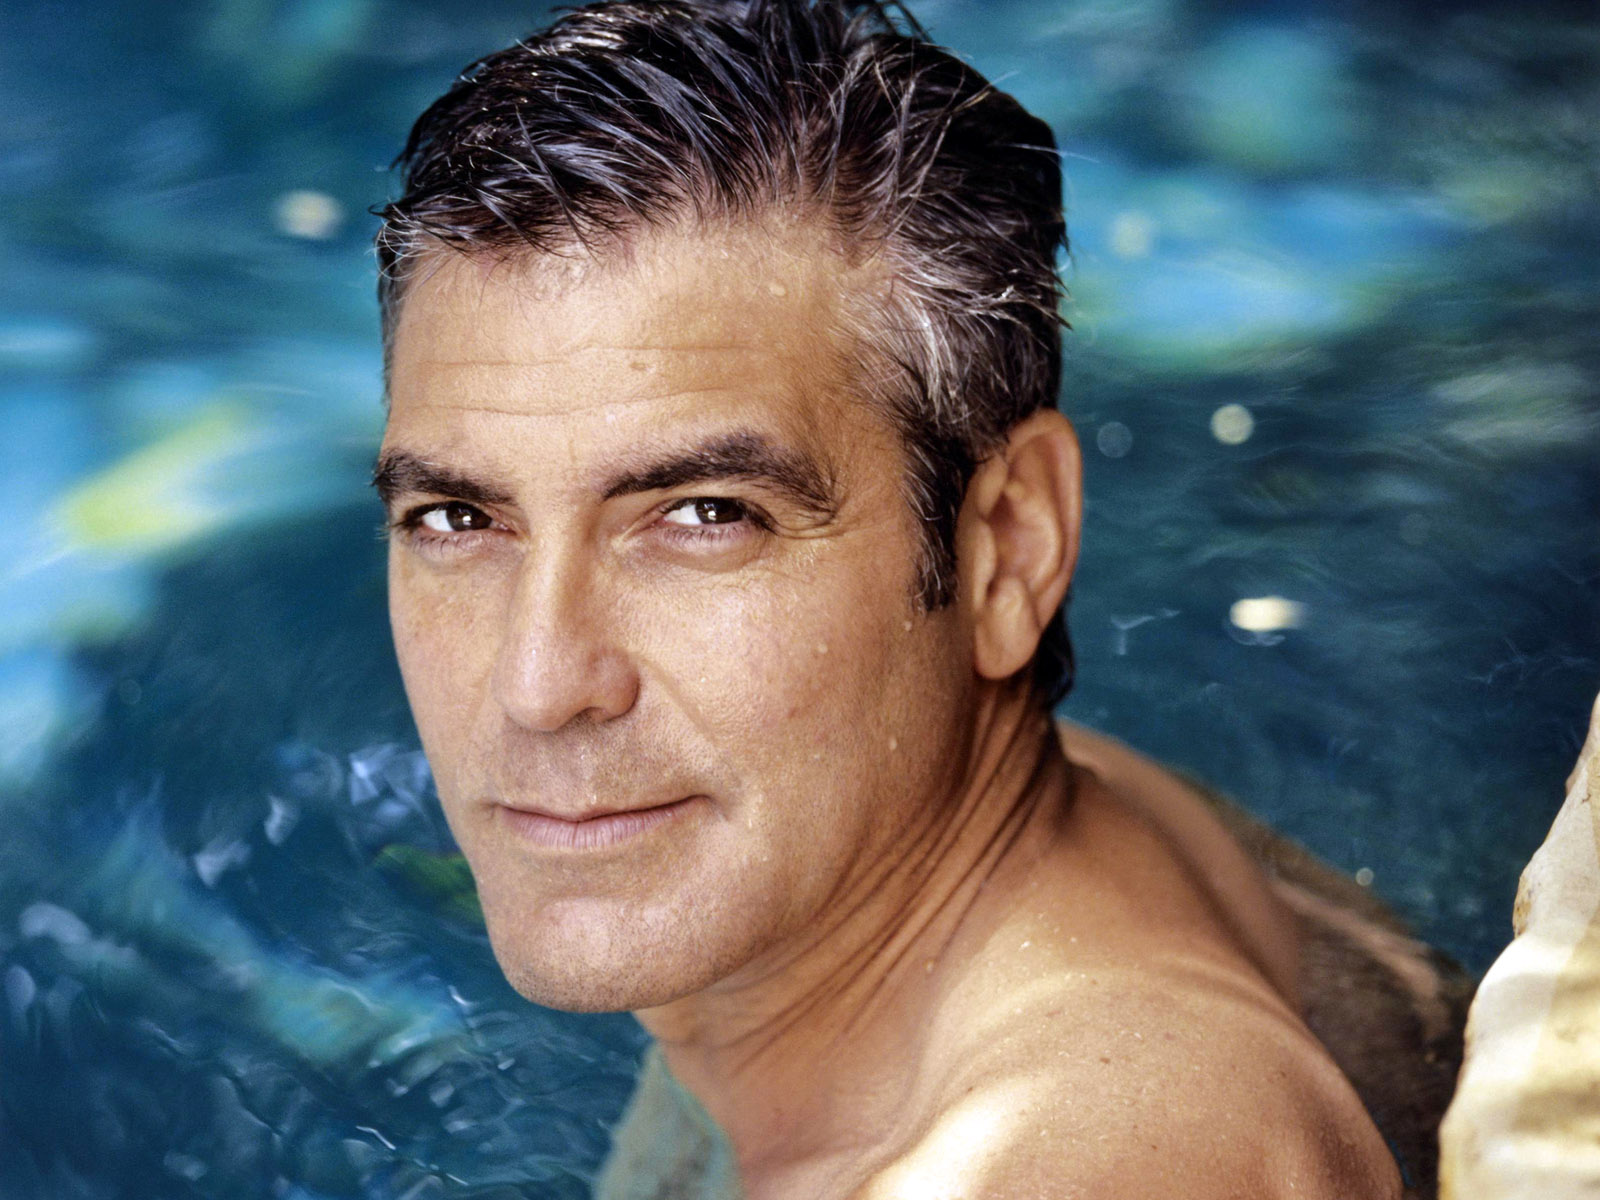 George Clooney: Diet And Fitness Plan